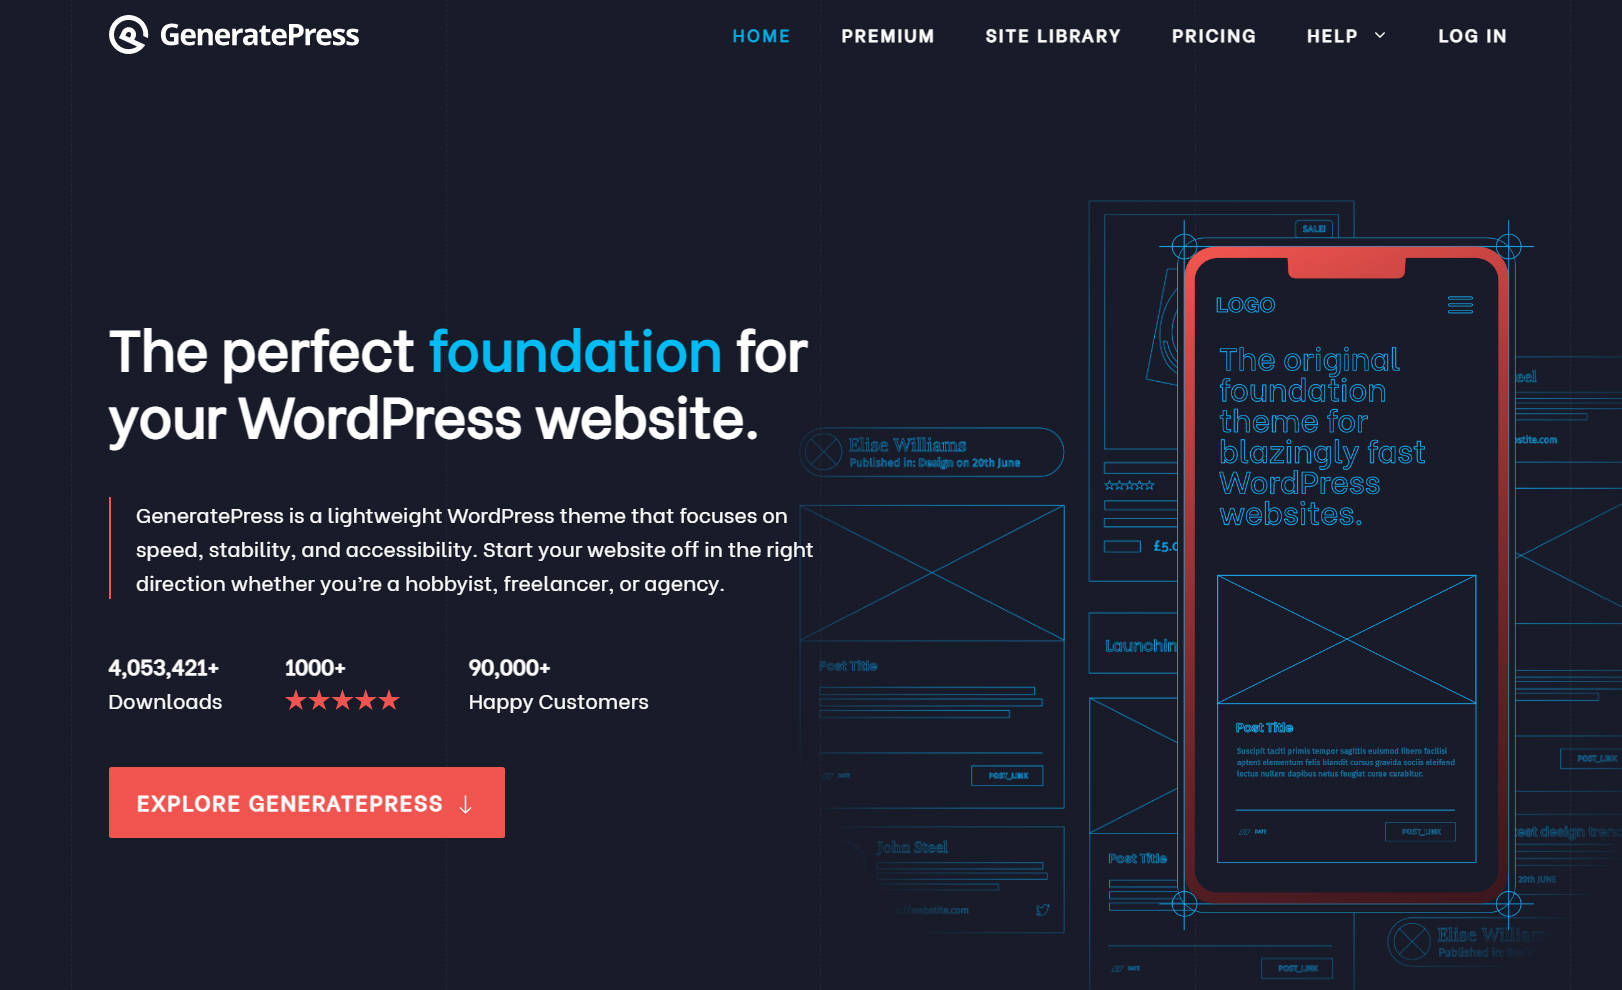 GeneratePress is one of the fastest WordPress themes